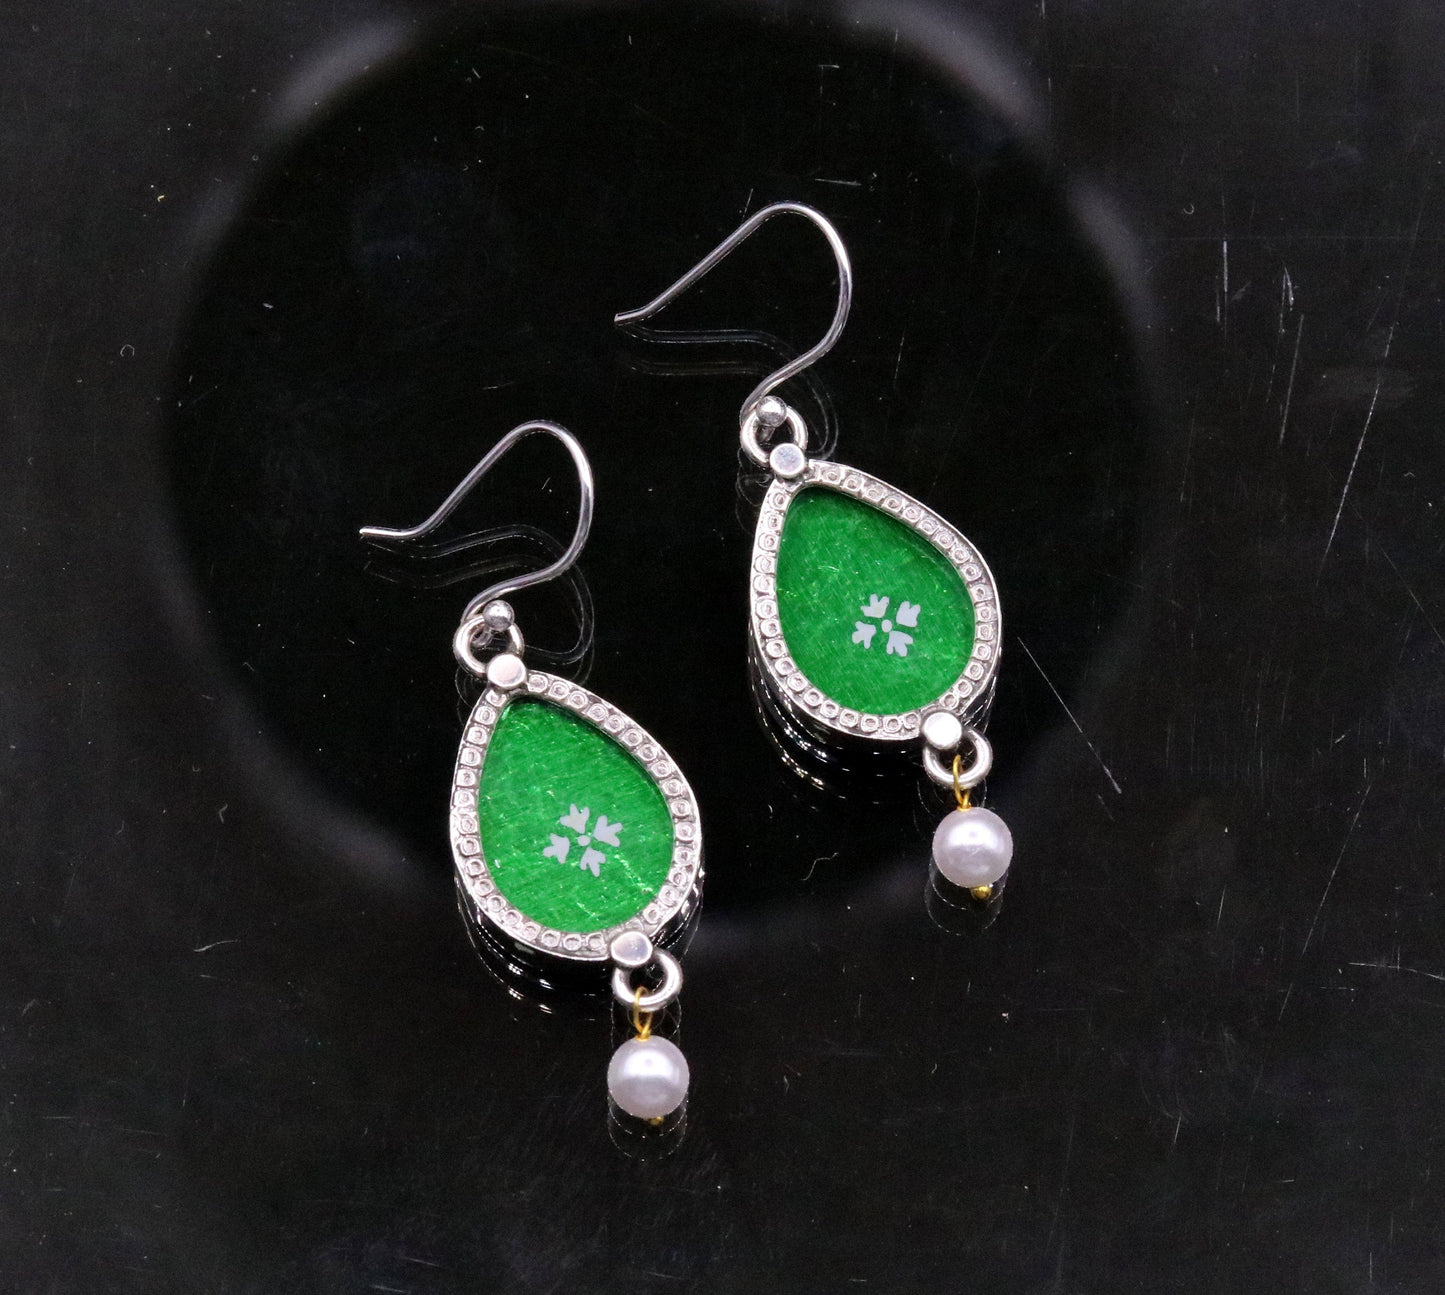 Stylish 925 sterling silver hoops earring drop dangle pearl excellent glass frame green painting ear plug stylish gifting jewelry s634 - TRIBAL ORNAMENTS